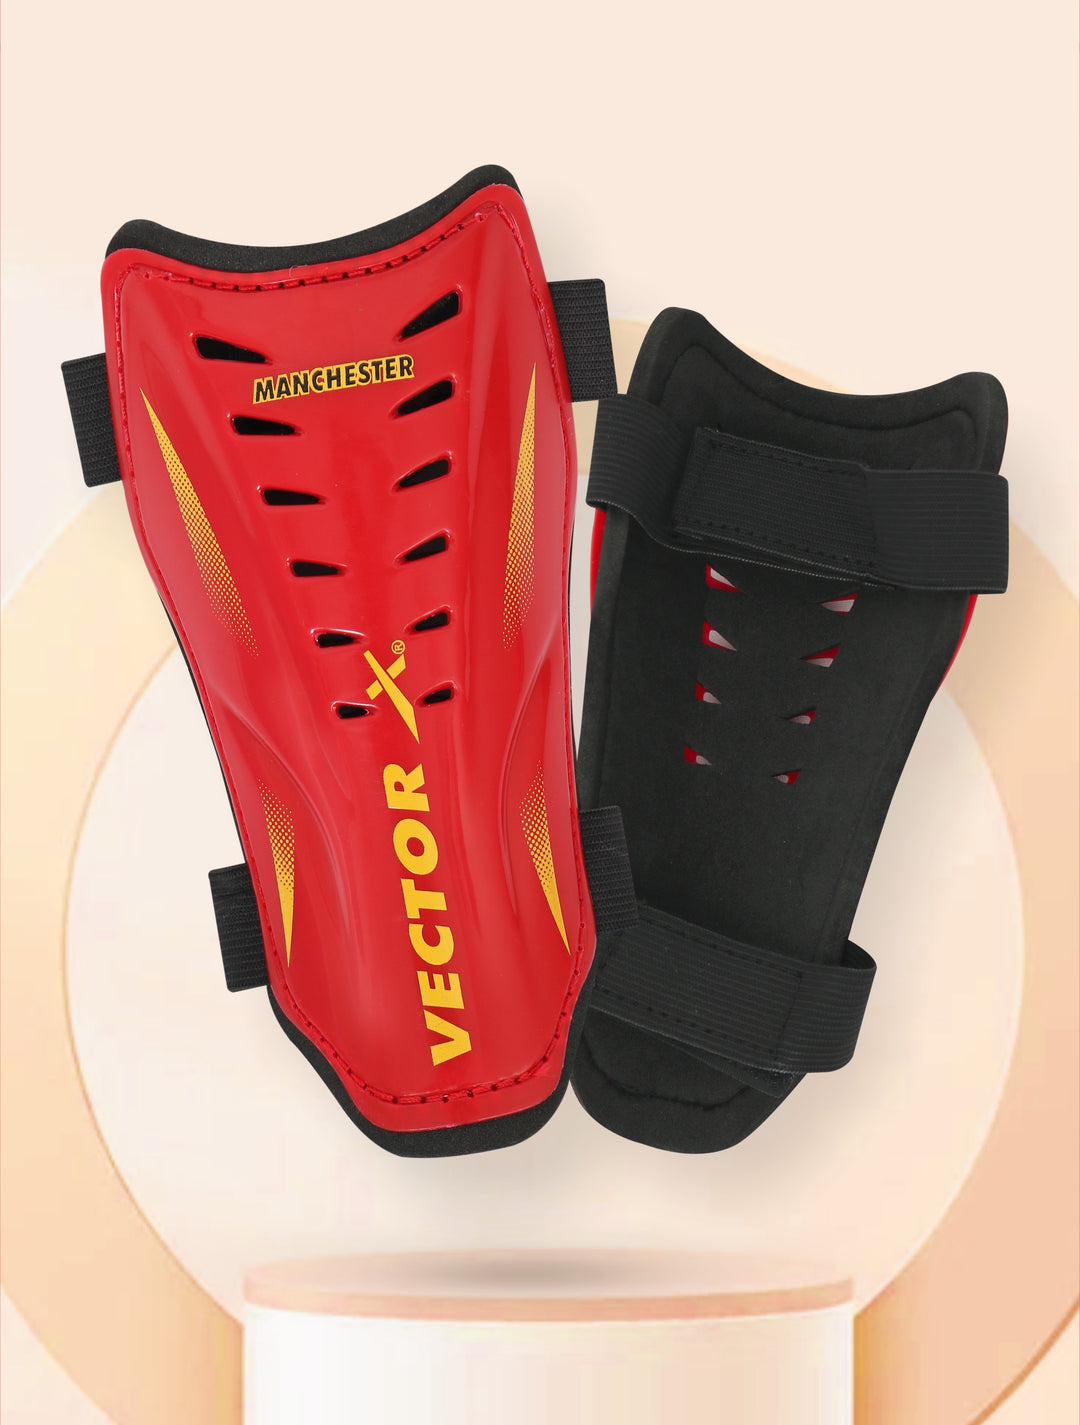 Red MANCHESTER Football Shin Guard 1 pair (Size - M)